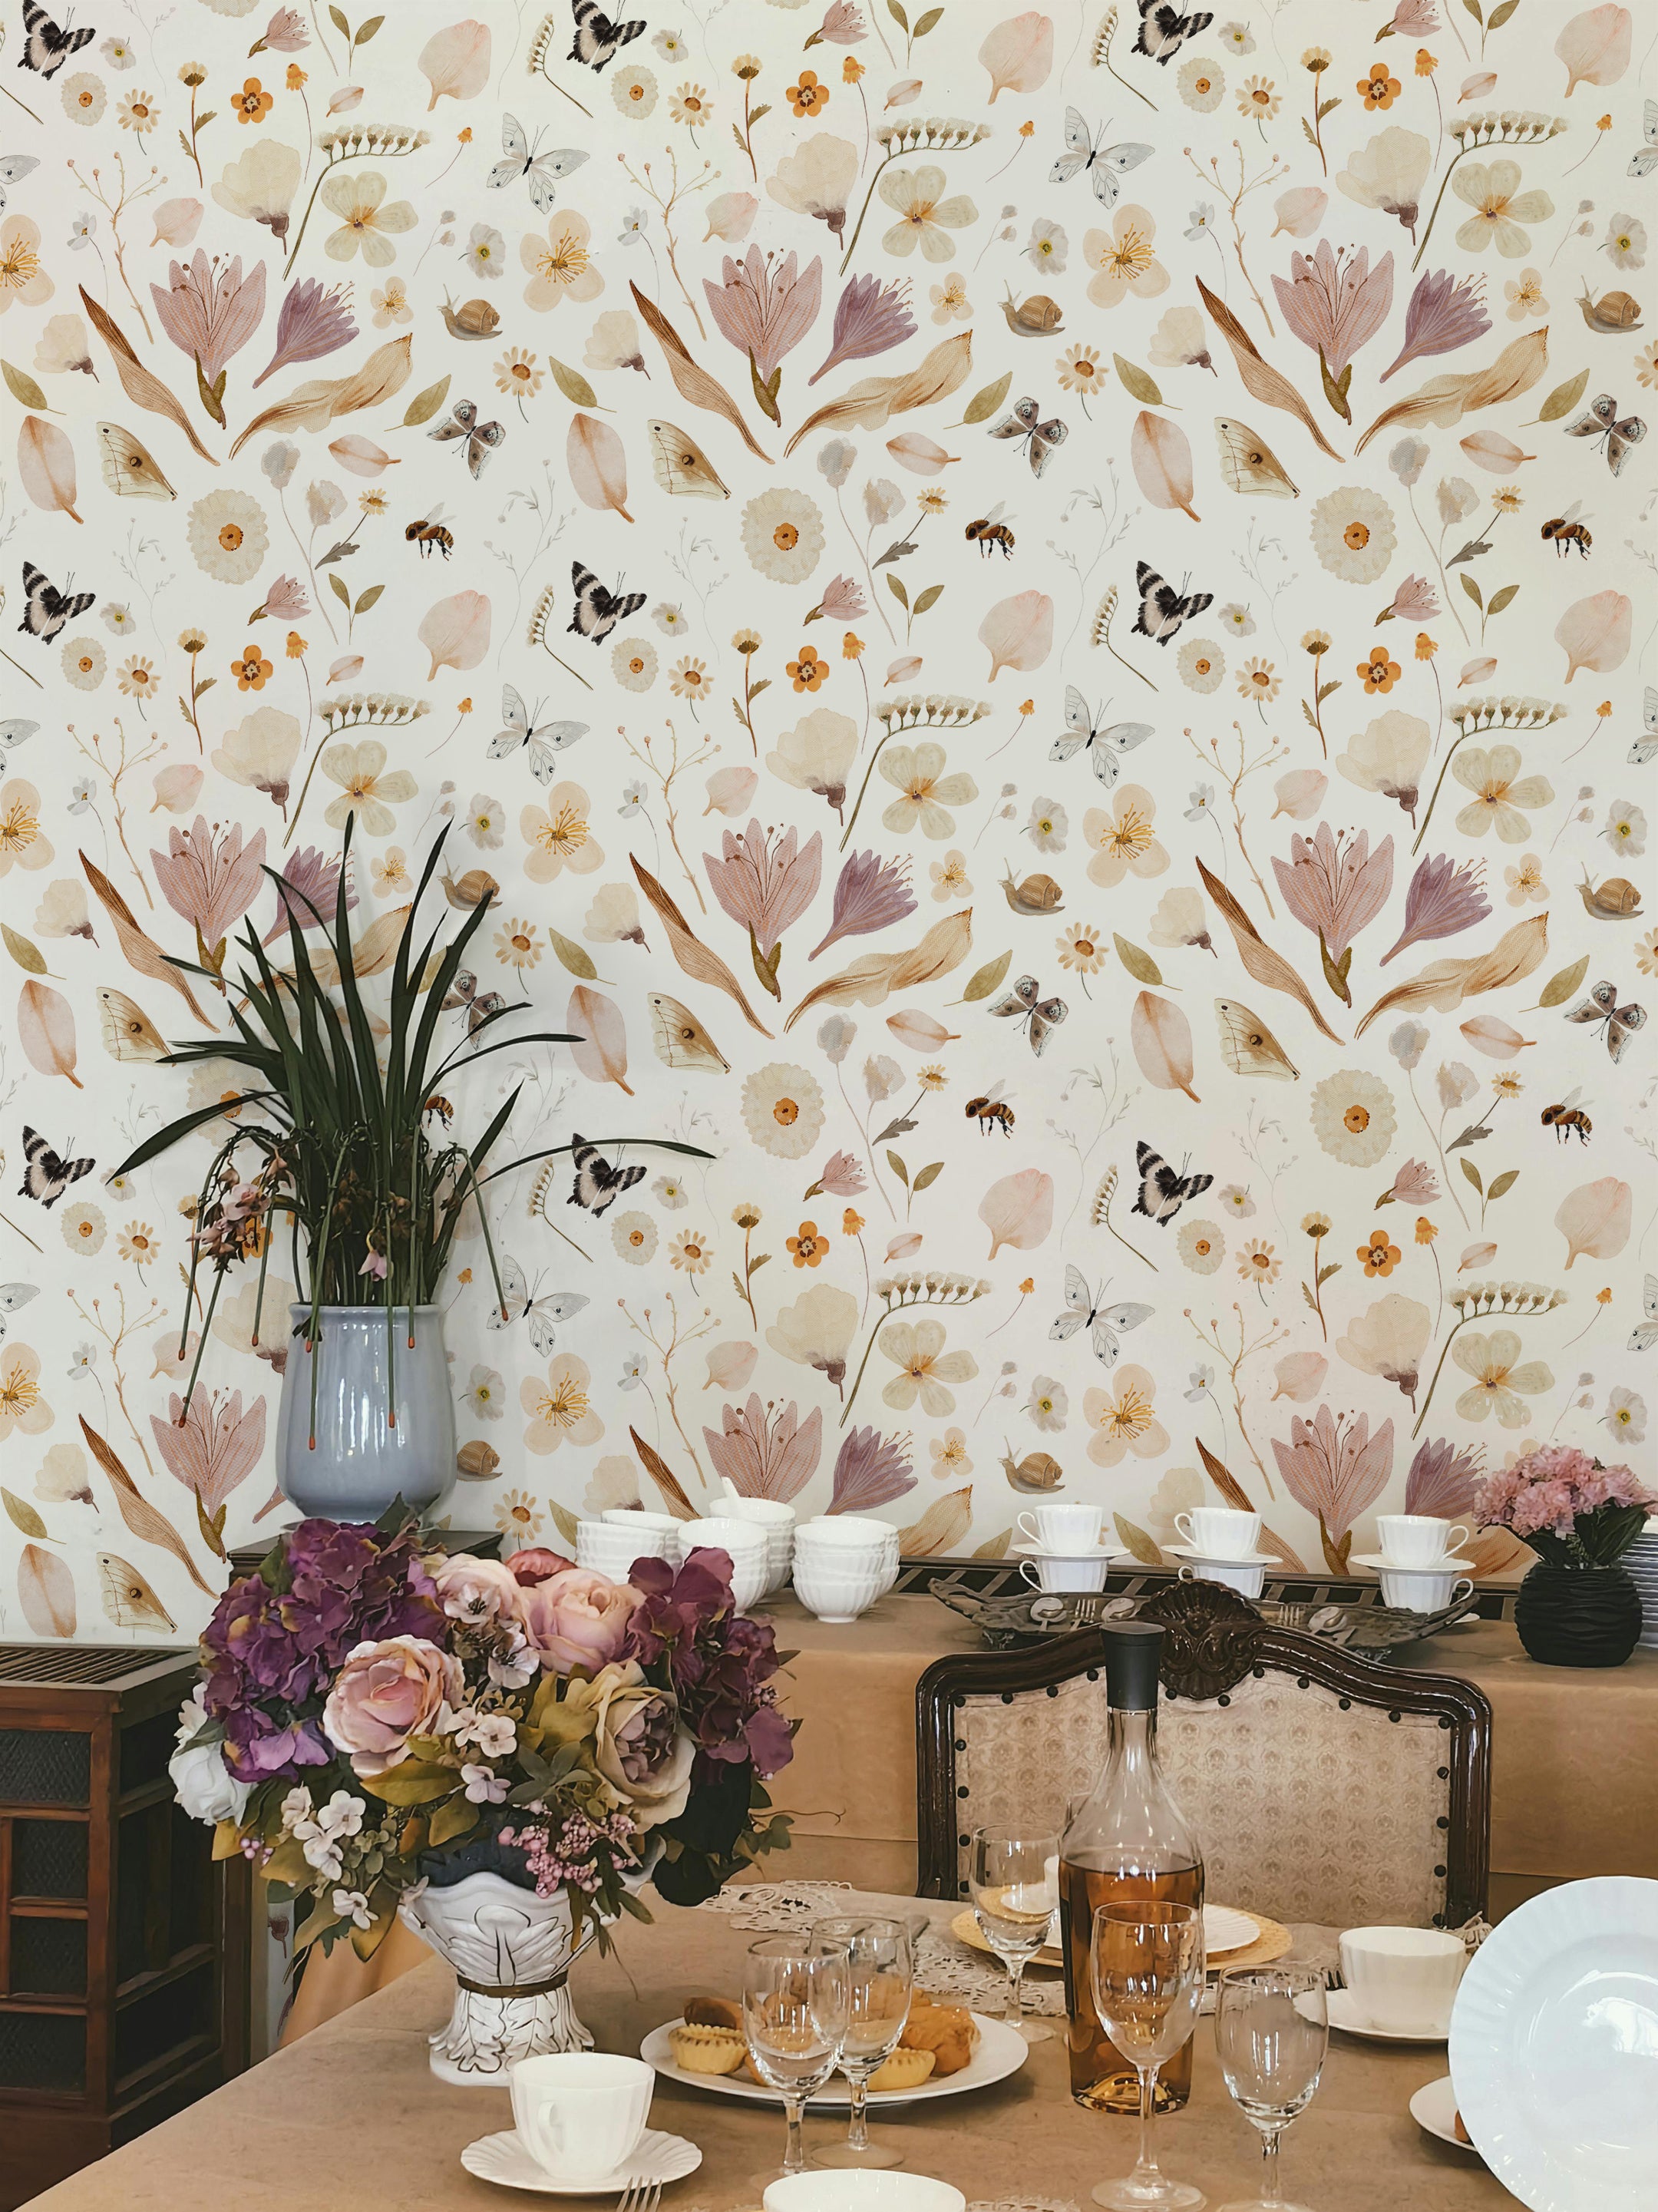 A beautifully set dining area adorned with the Boho Garden Wallpaper - 25". The wall serves as a splendid backdrop with its floral and butterfly motifs, enhancing the room's elegance and complementing the classic table setting and floral arrangements.